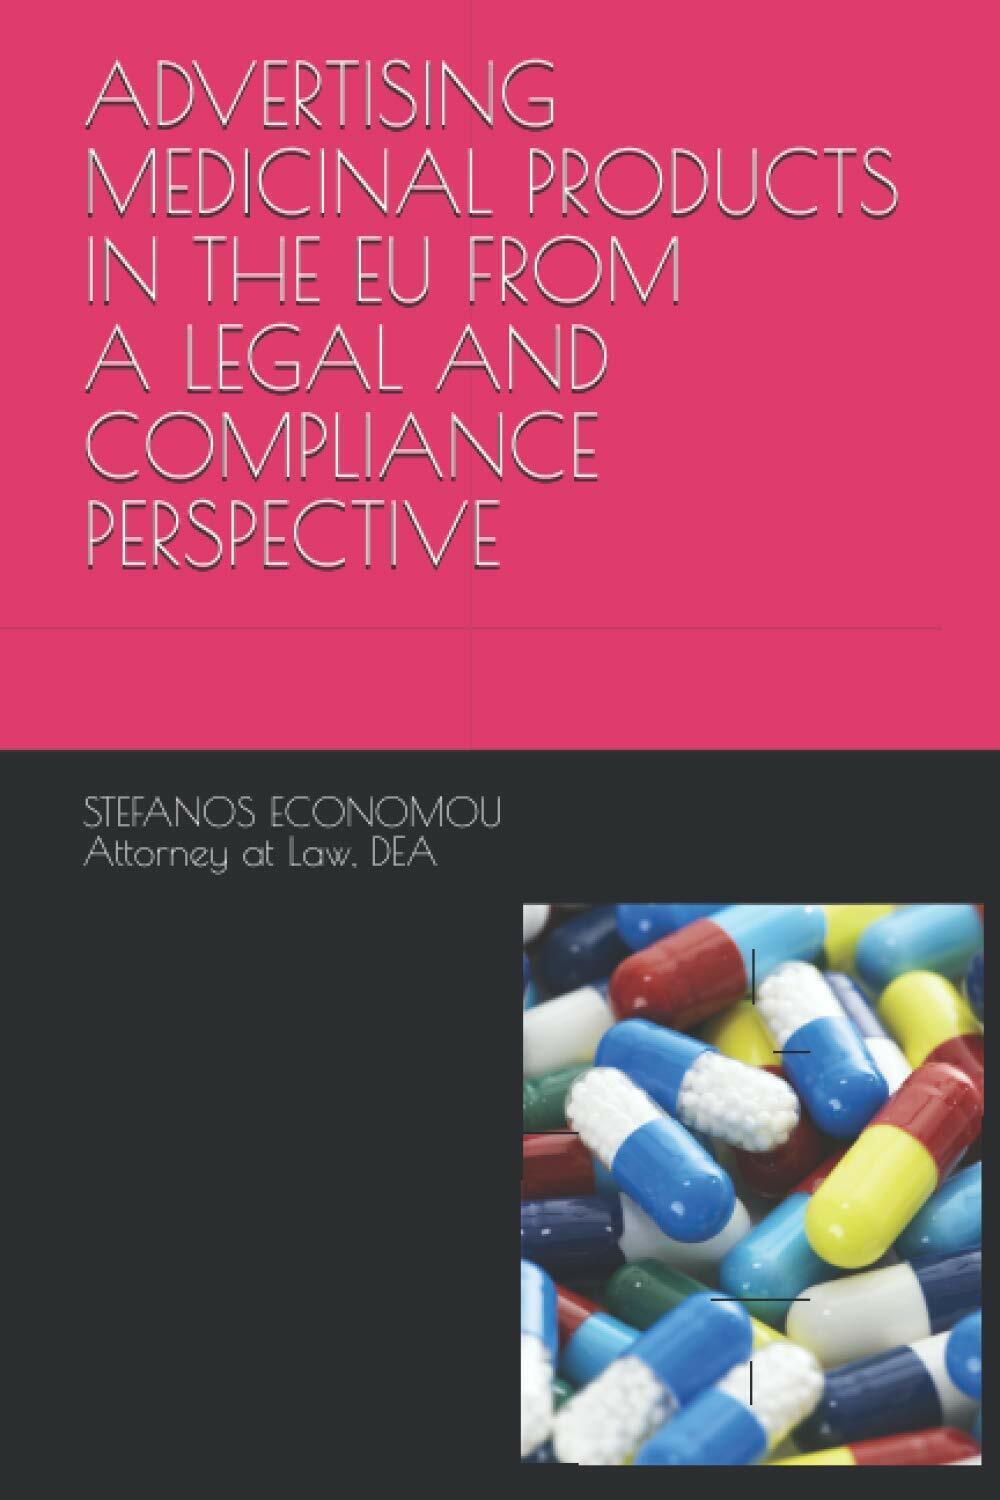 ADVERTISING MEDICINAL PRODUCTS IN THE EU FROM A LEGAL AND COMPLIANCE PERSPECTIVE